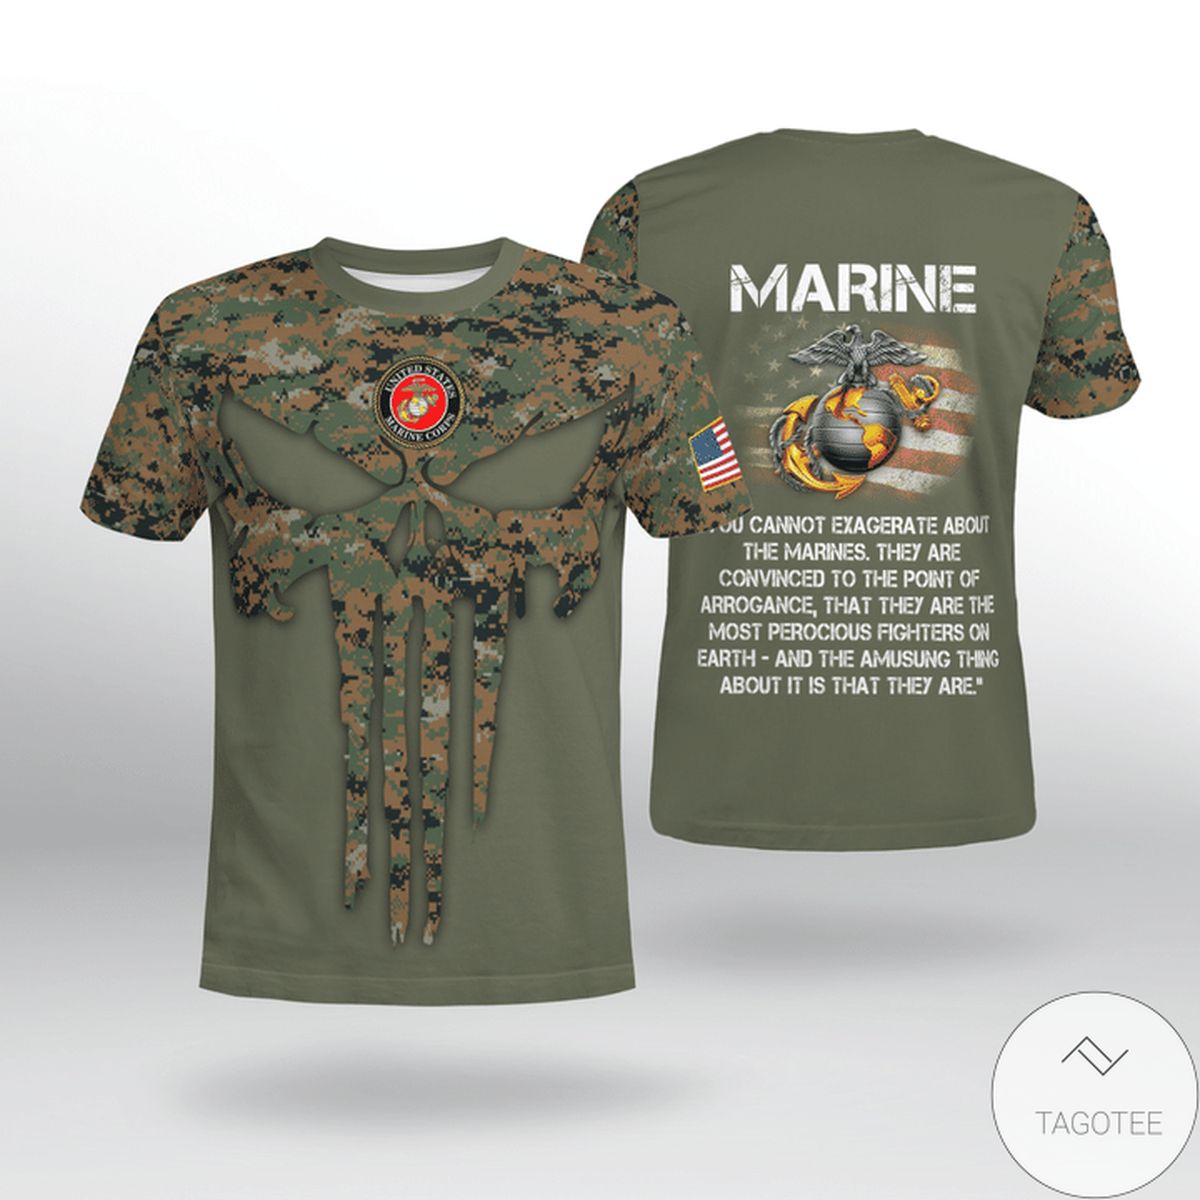 You Cannot Exaggerate About The Marines Shirt